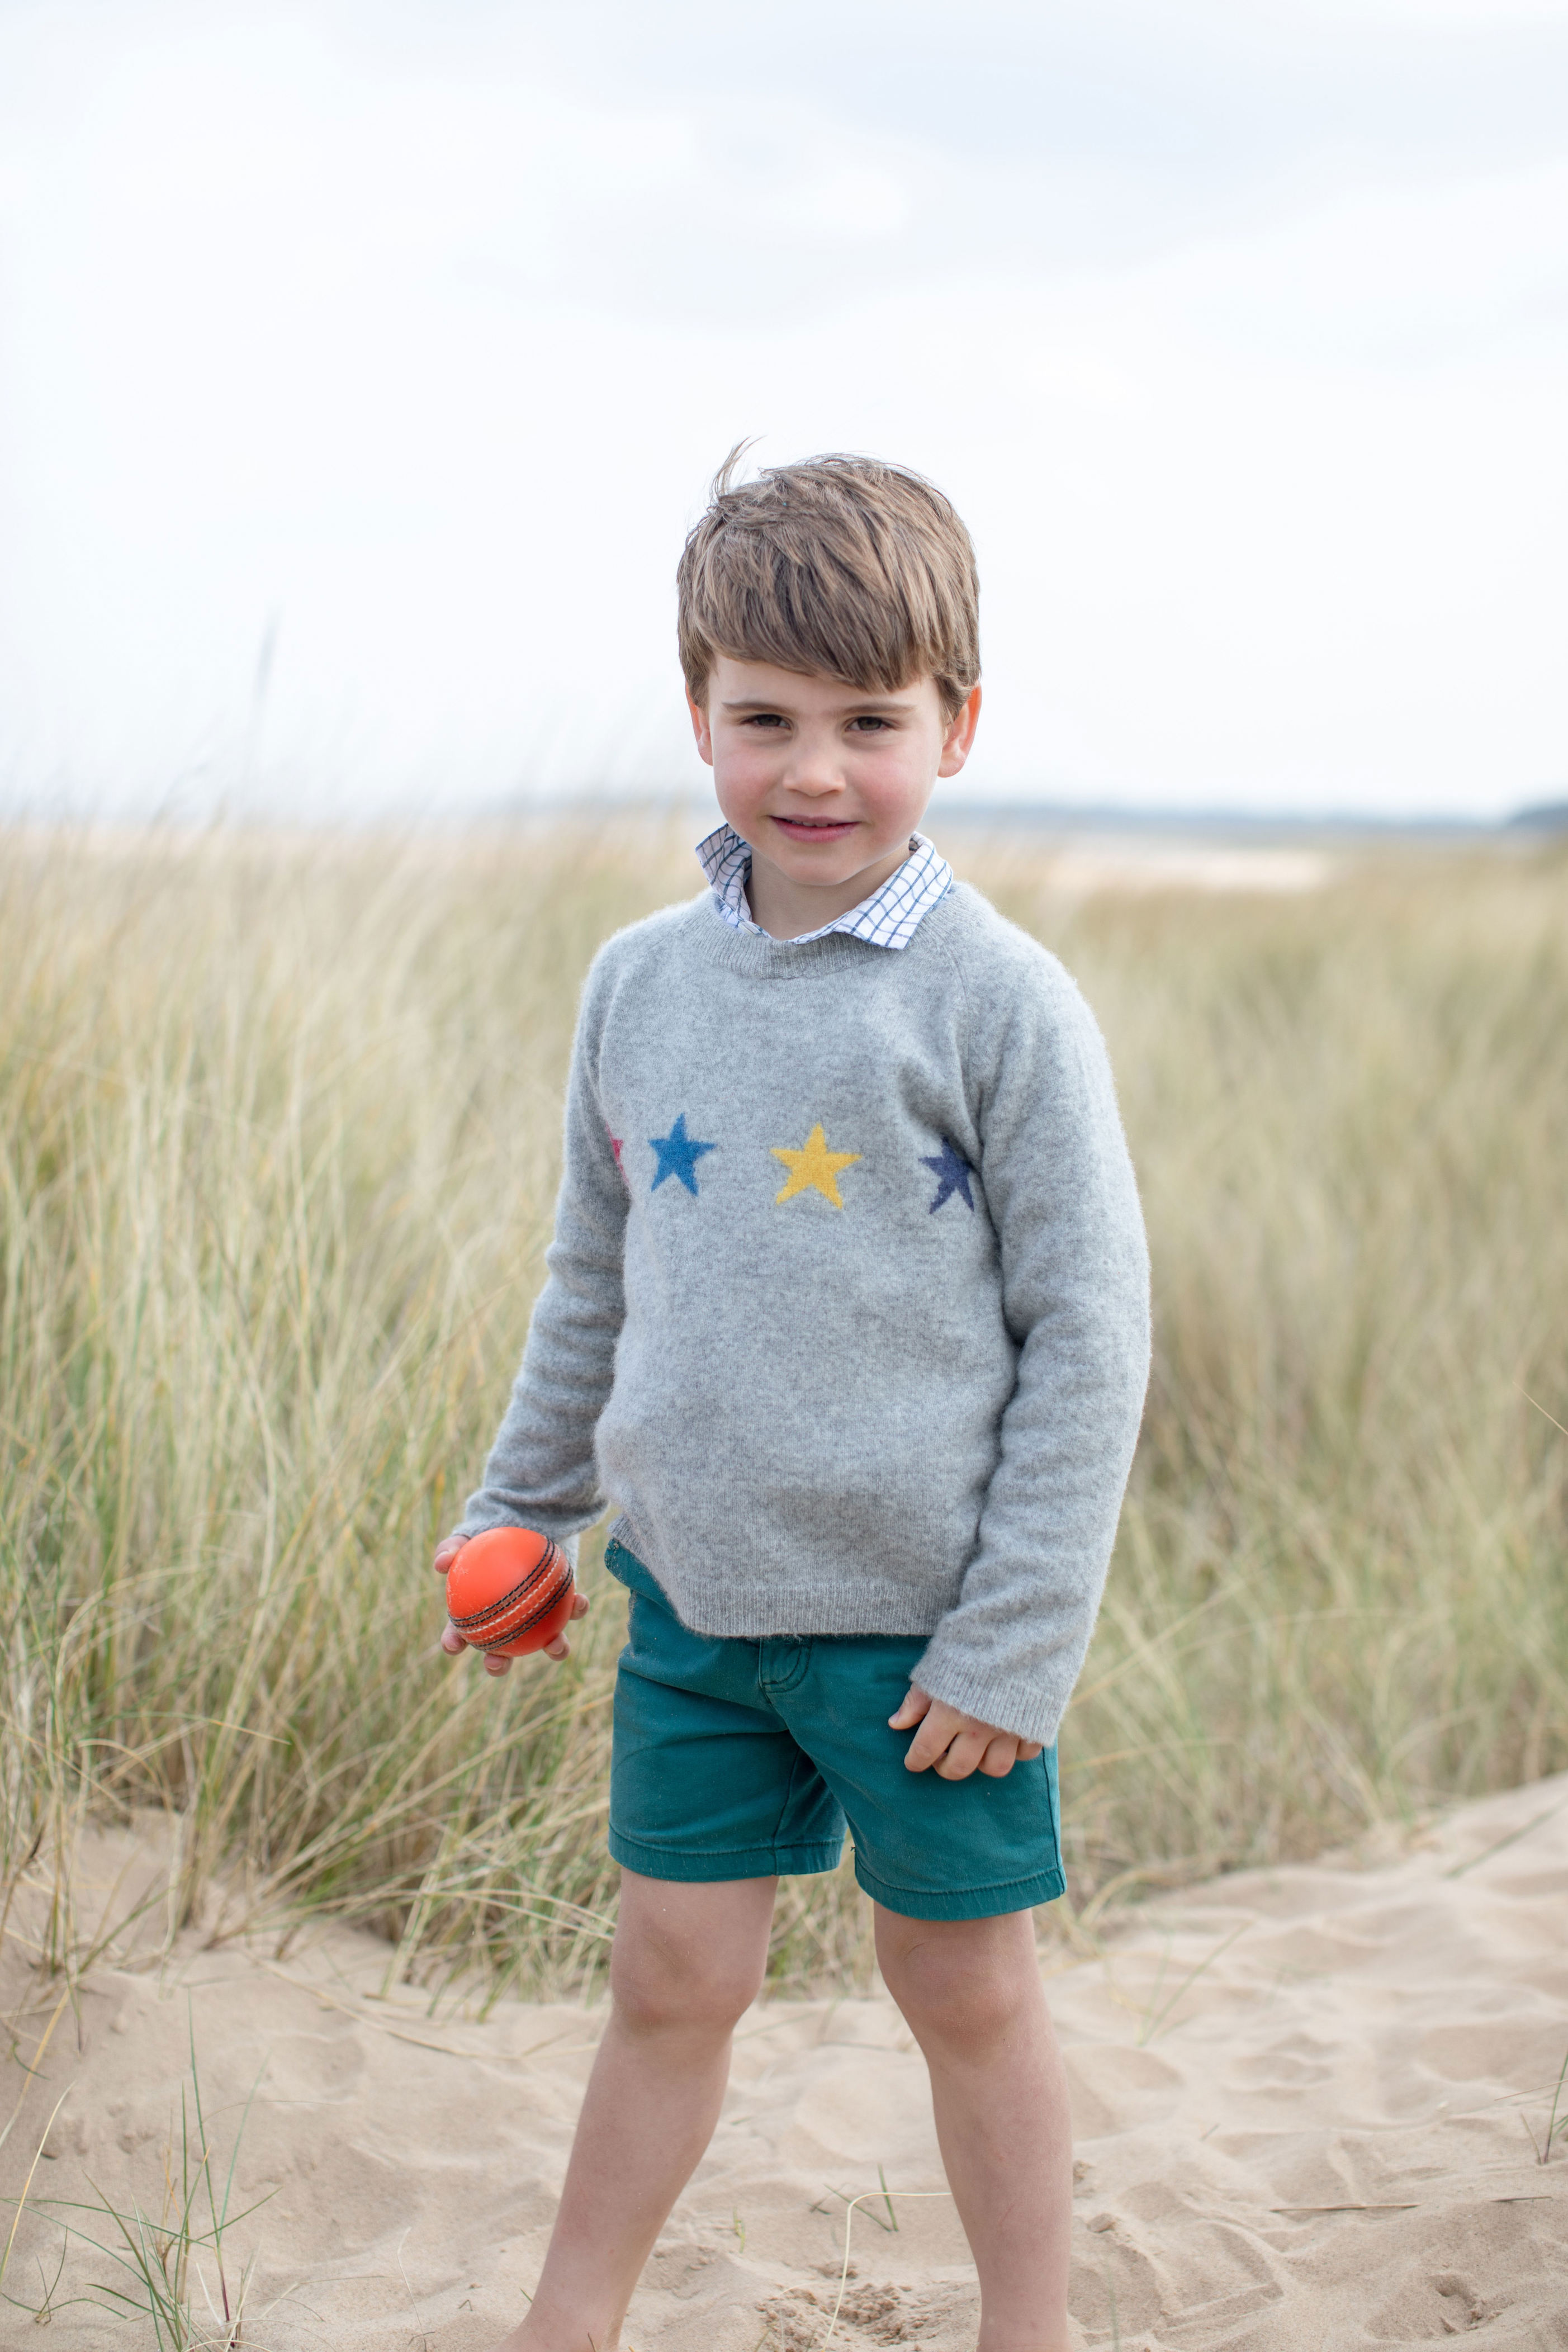 <p>Kensington Palace released this photo of Prince Louis holding a cricket ball on a beach in Norfolk, England -- it was taken by his mother, <a href="https://www.wonderwall.com/celebrity/profiles/overview/duchess-kate-1356.article">Duchess Kate</a> -- to mark his 4th birthday on April 23, 2022. Keep reading to see another adorable pic from the set...</p>